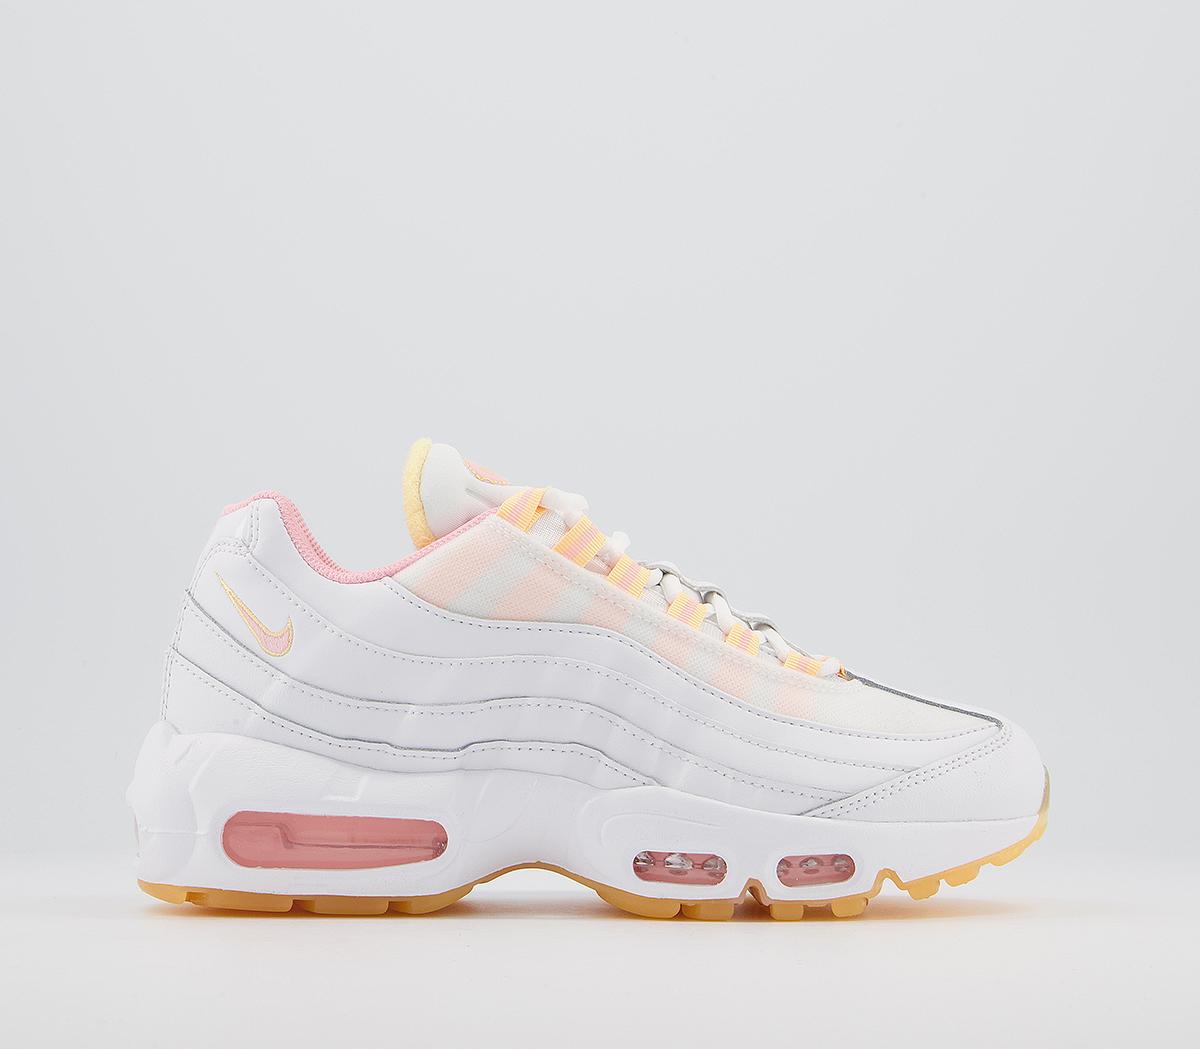 Nike Air Max 95 Trainers White Artic Punch Melon Tint - Women's Trainers